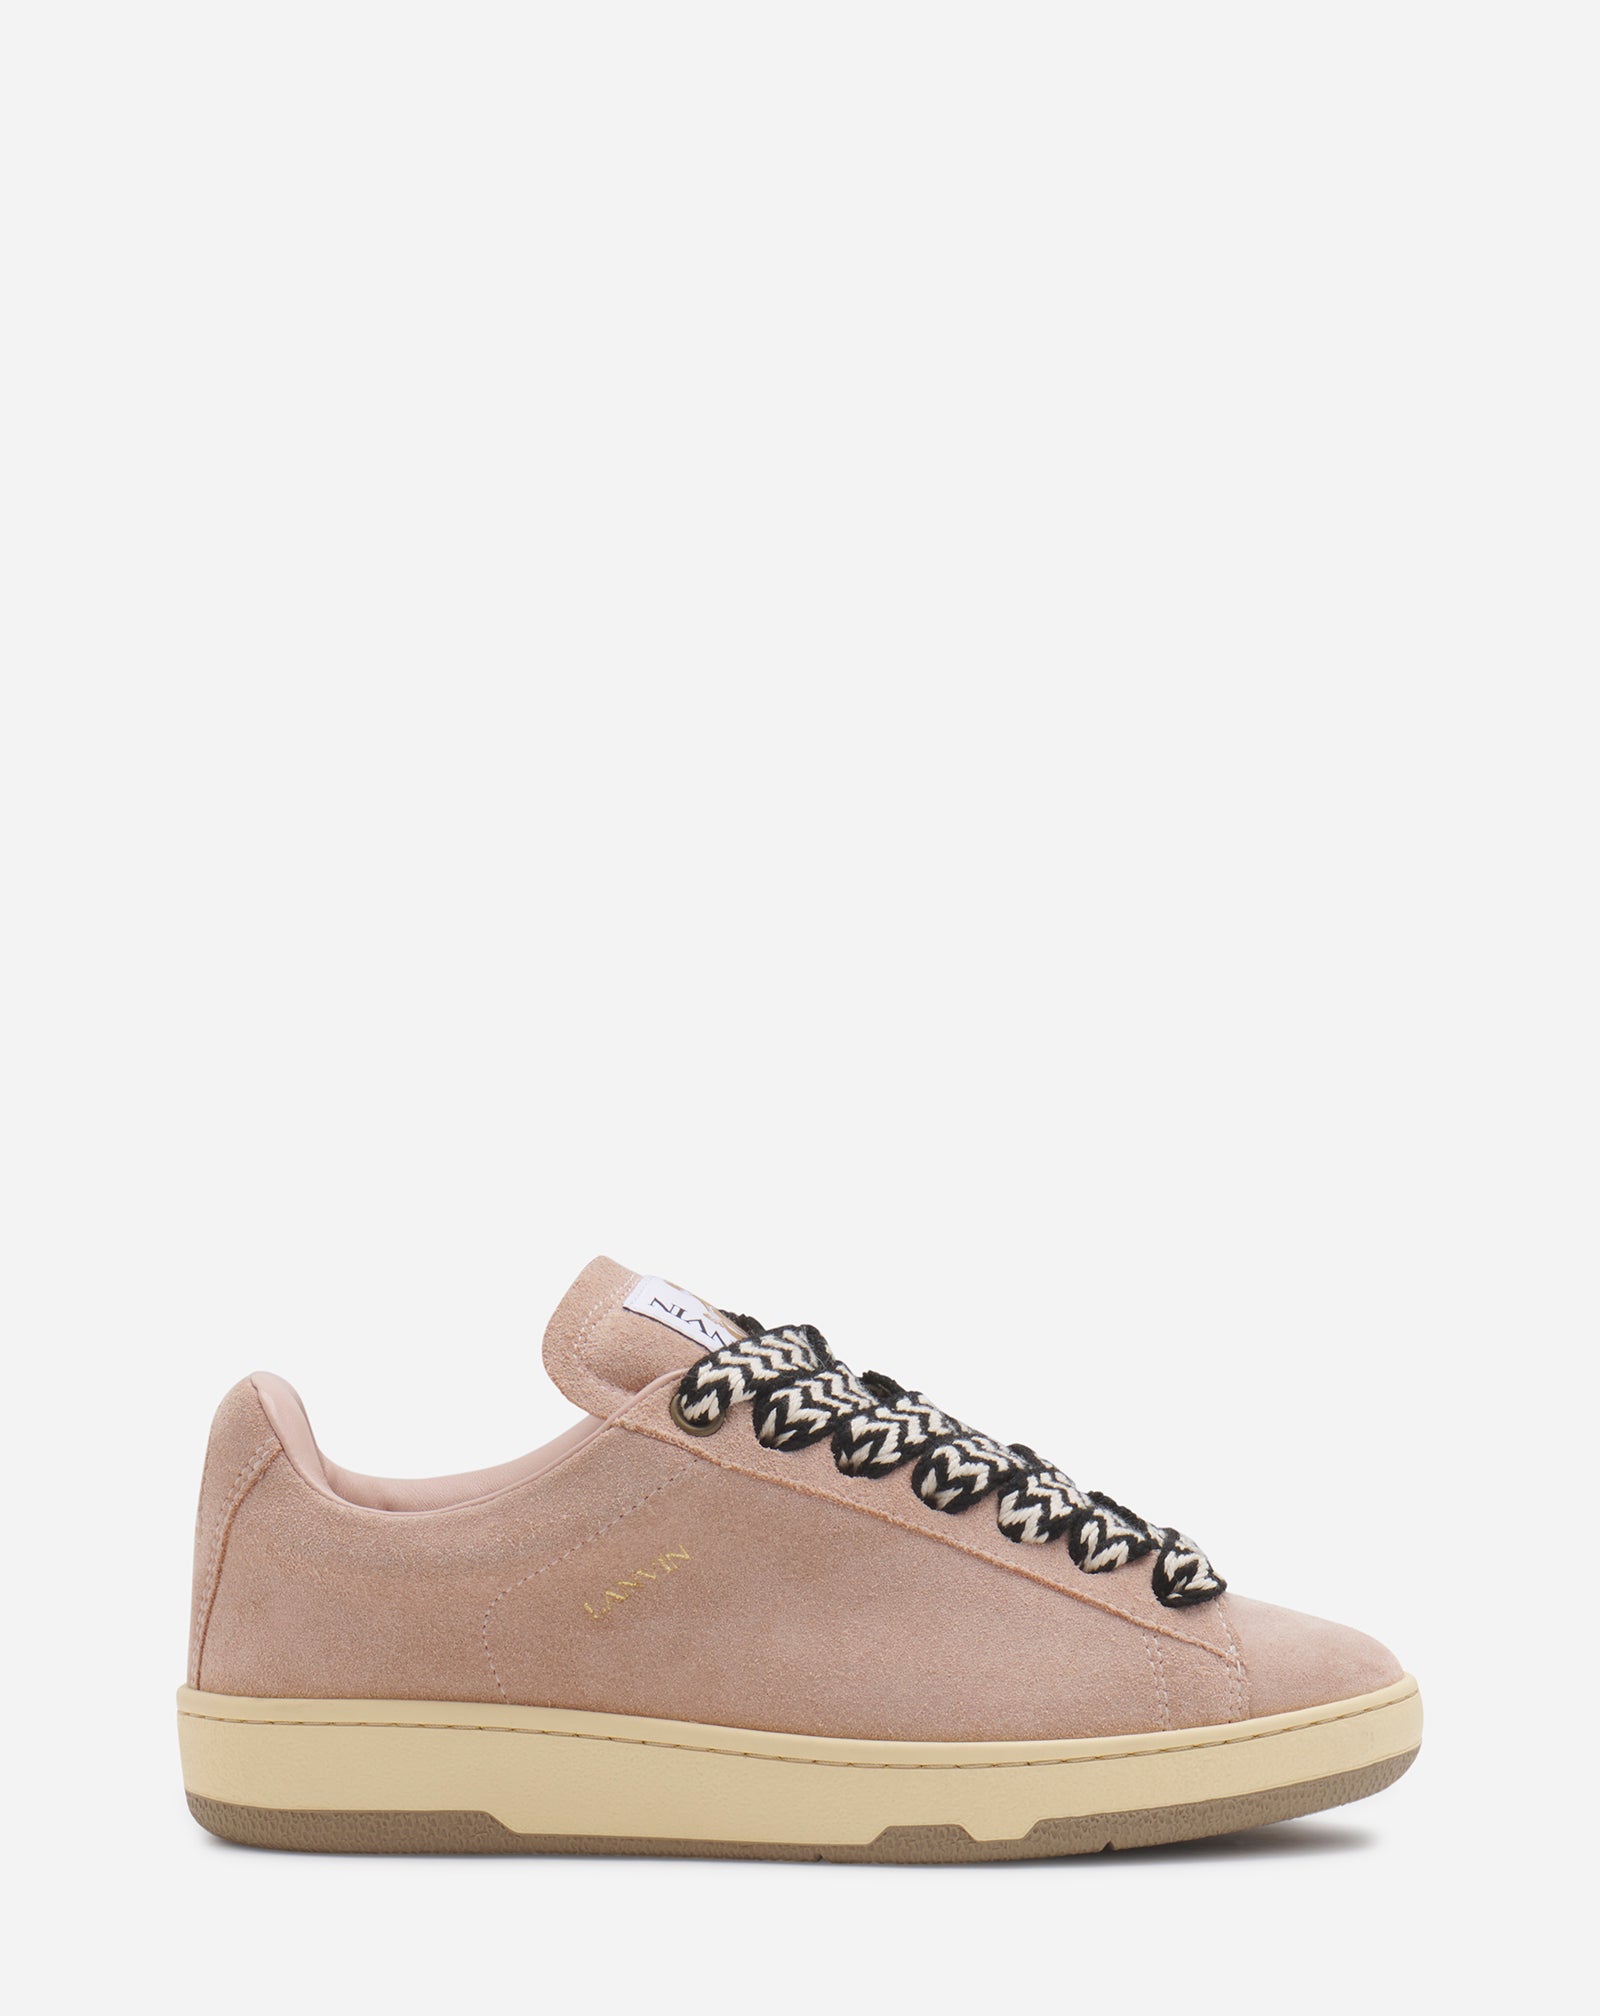 Details more than 141 dusty pink sneakers latest